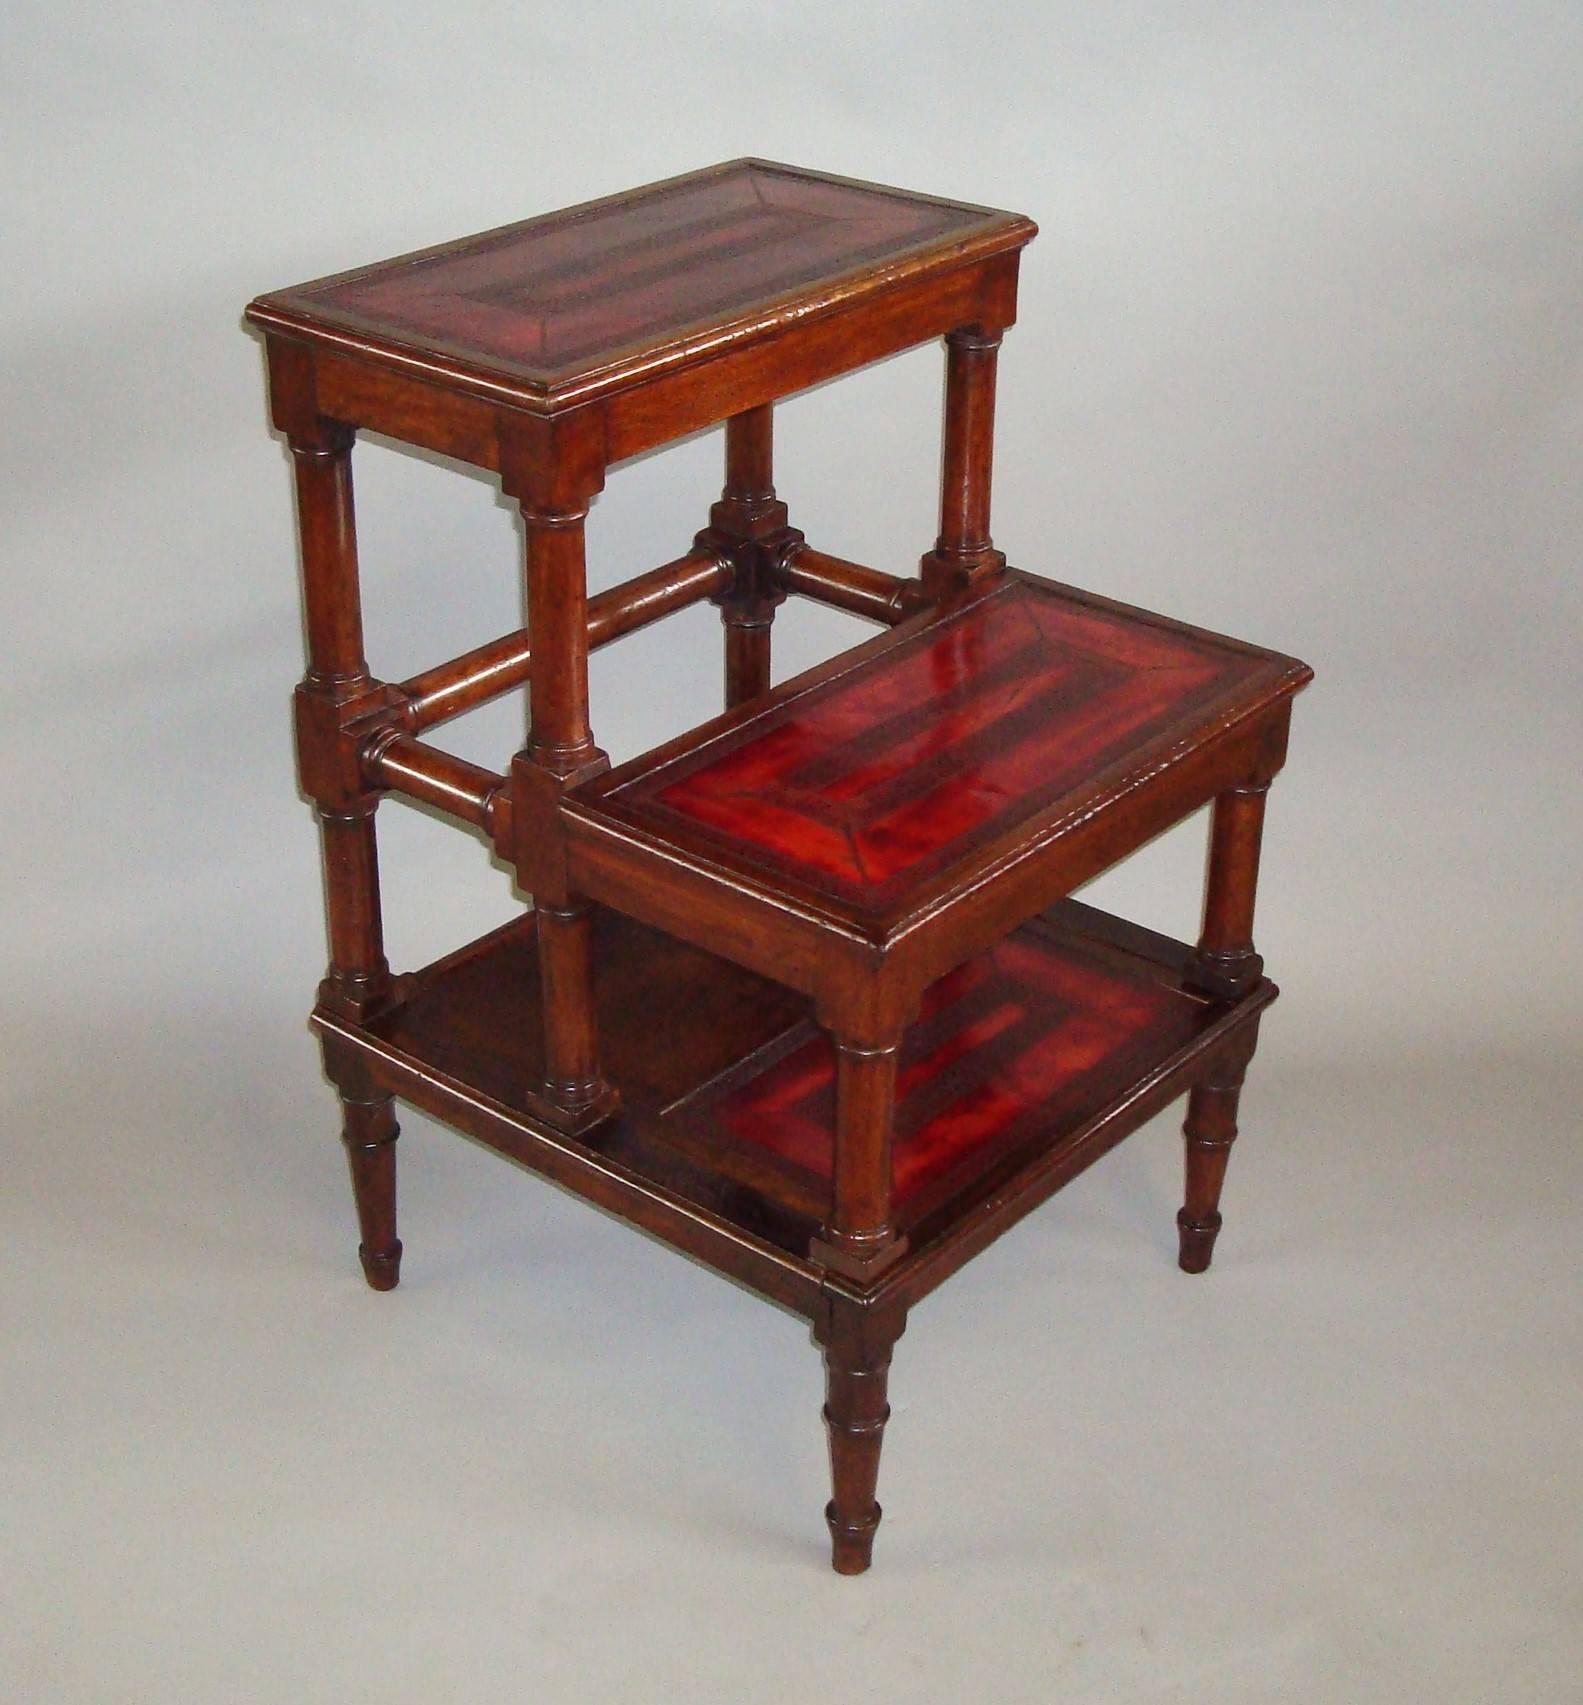 A good George III mahogany set of library steps of unusual form, the three treads with moulded edges inset with good quality burgundy leather incorporating faded areas and heavily tooled with foliate designs and a good patination, raised on turned